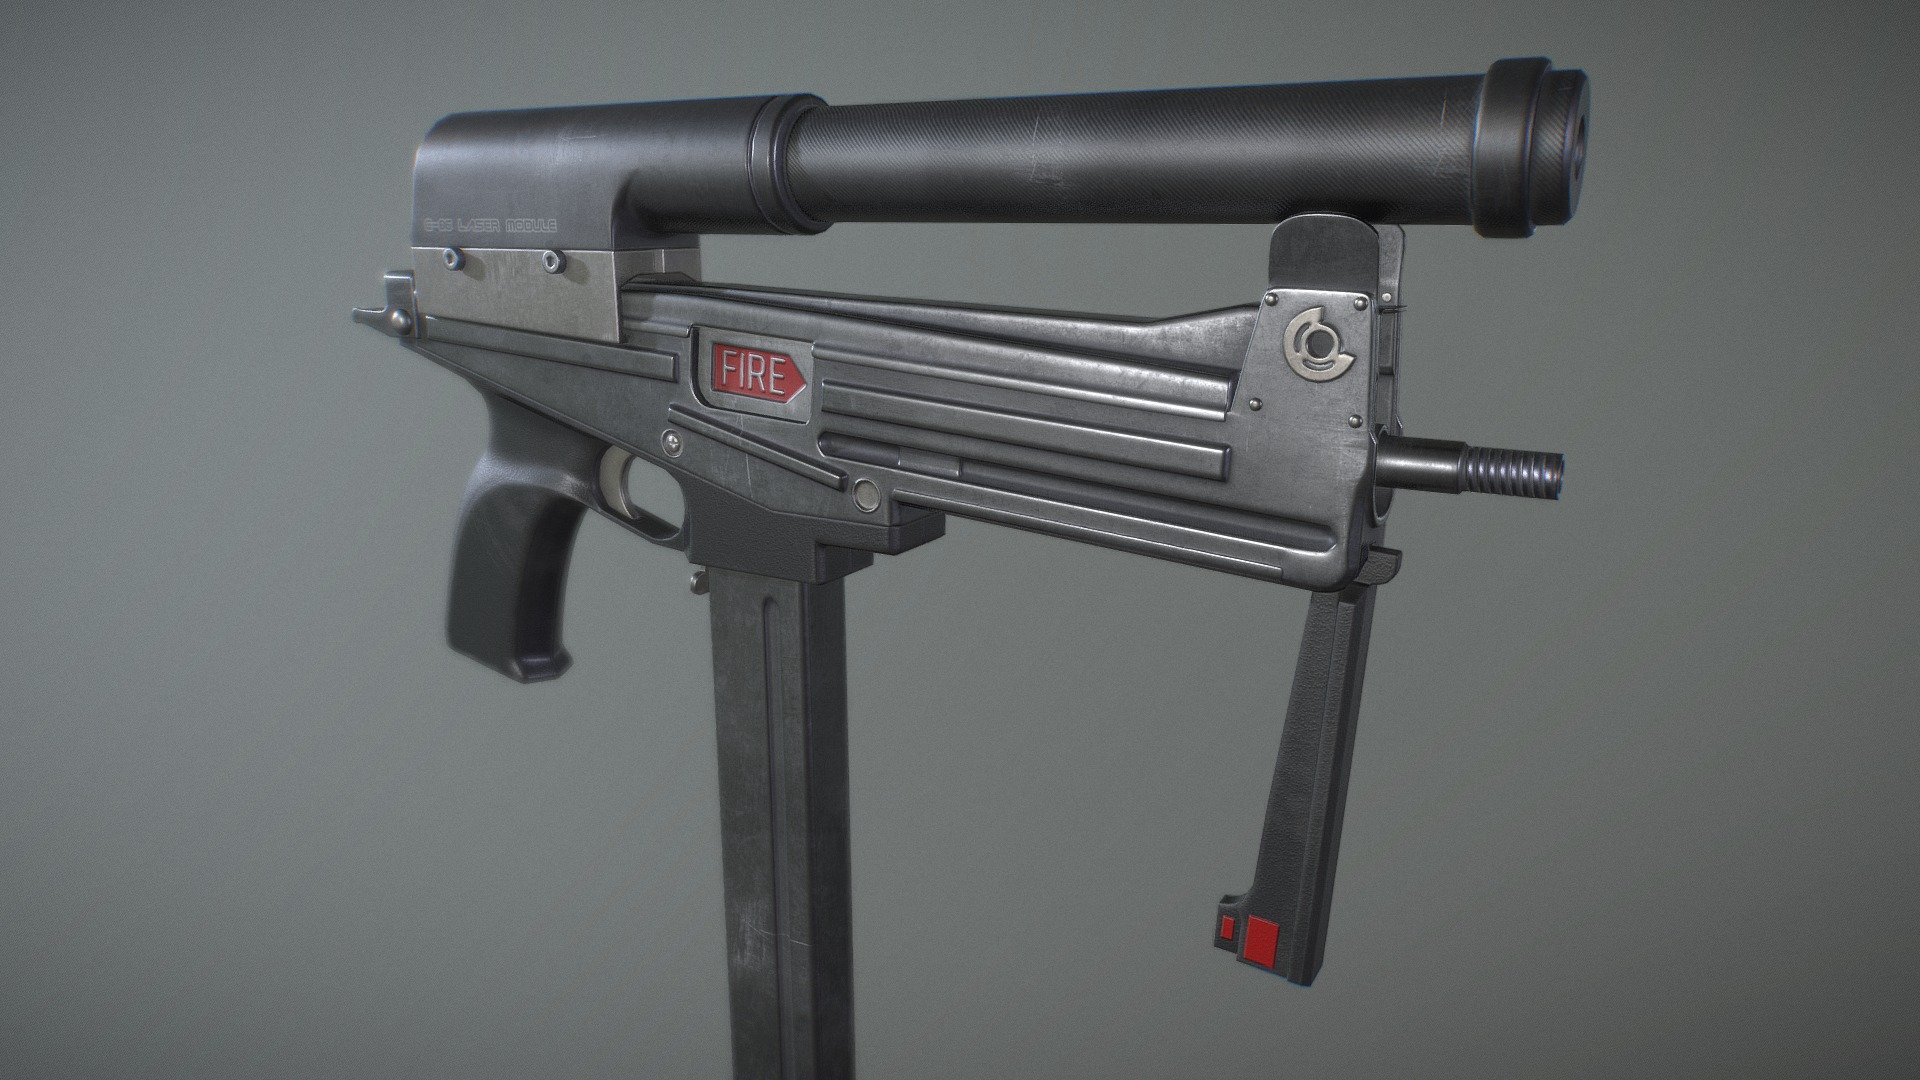 Finnish submachine gun from the 80s. Mostly remembered because of the 1986 film Cobra.

Riggable model files in .fbx format and hires textures included as additional files 3d model